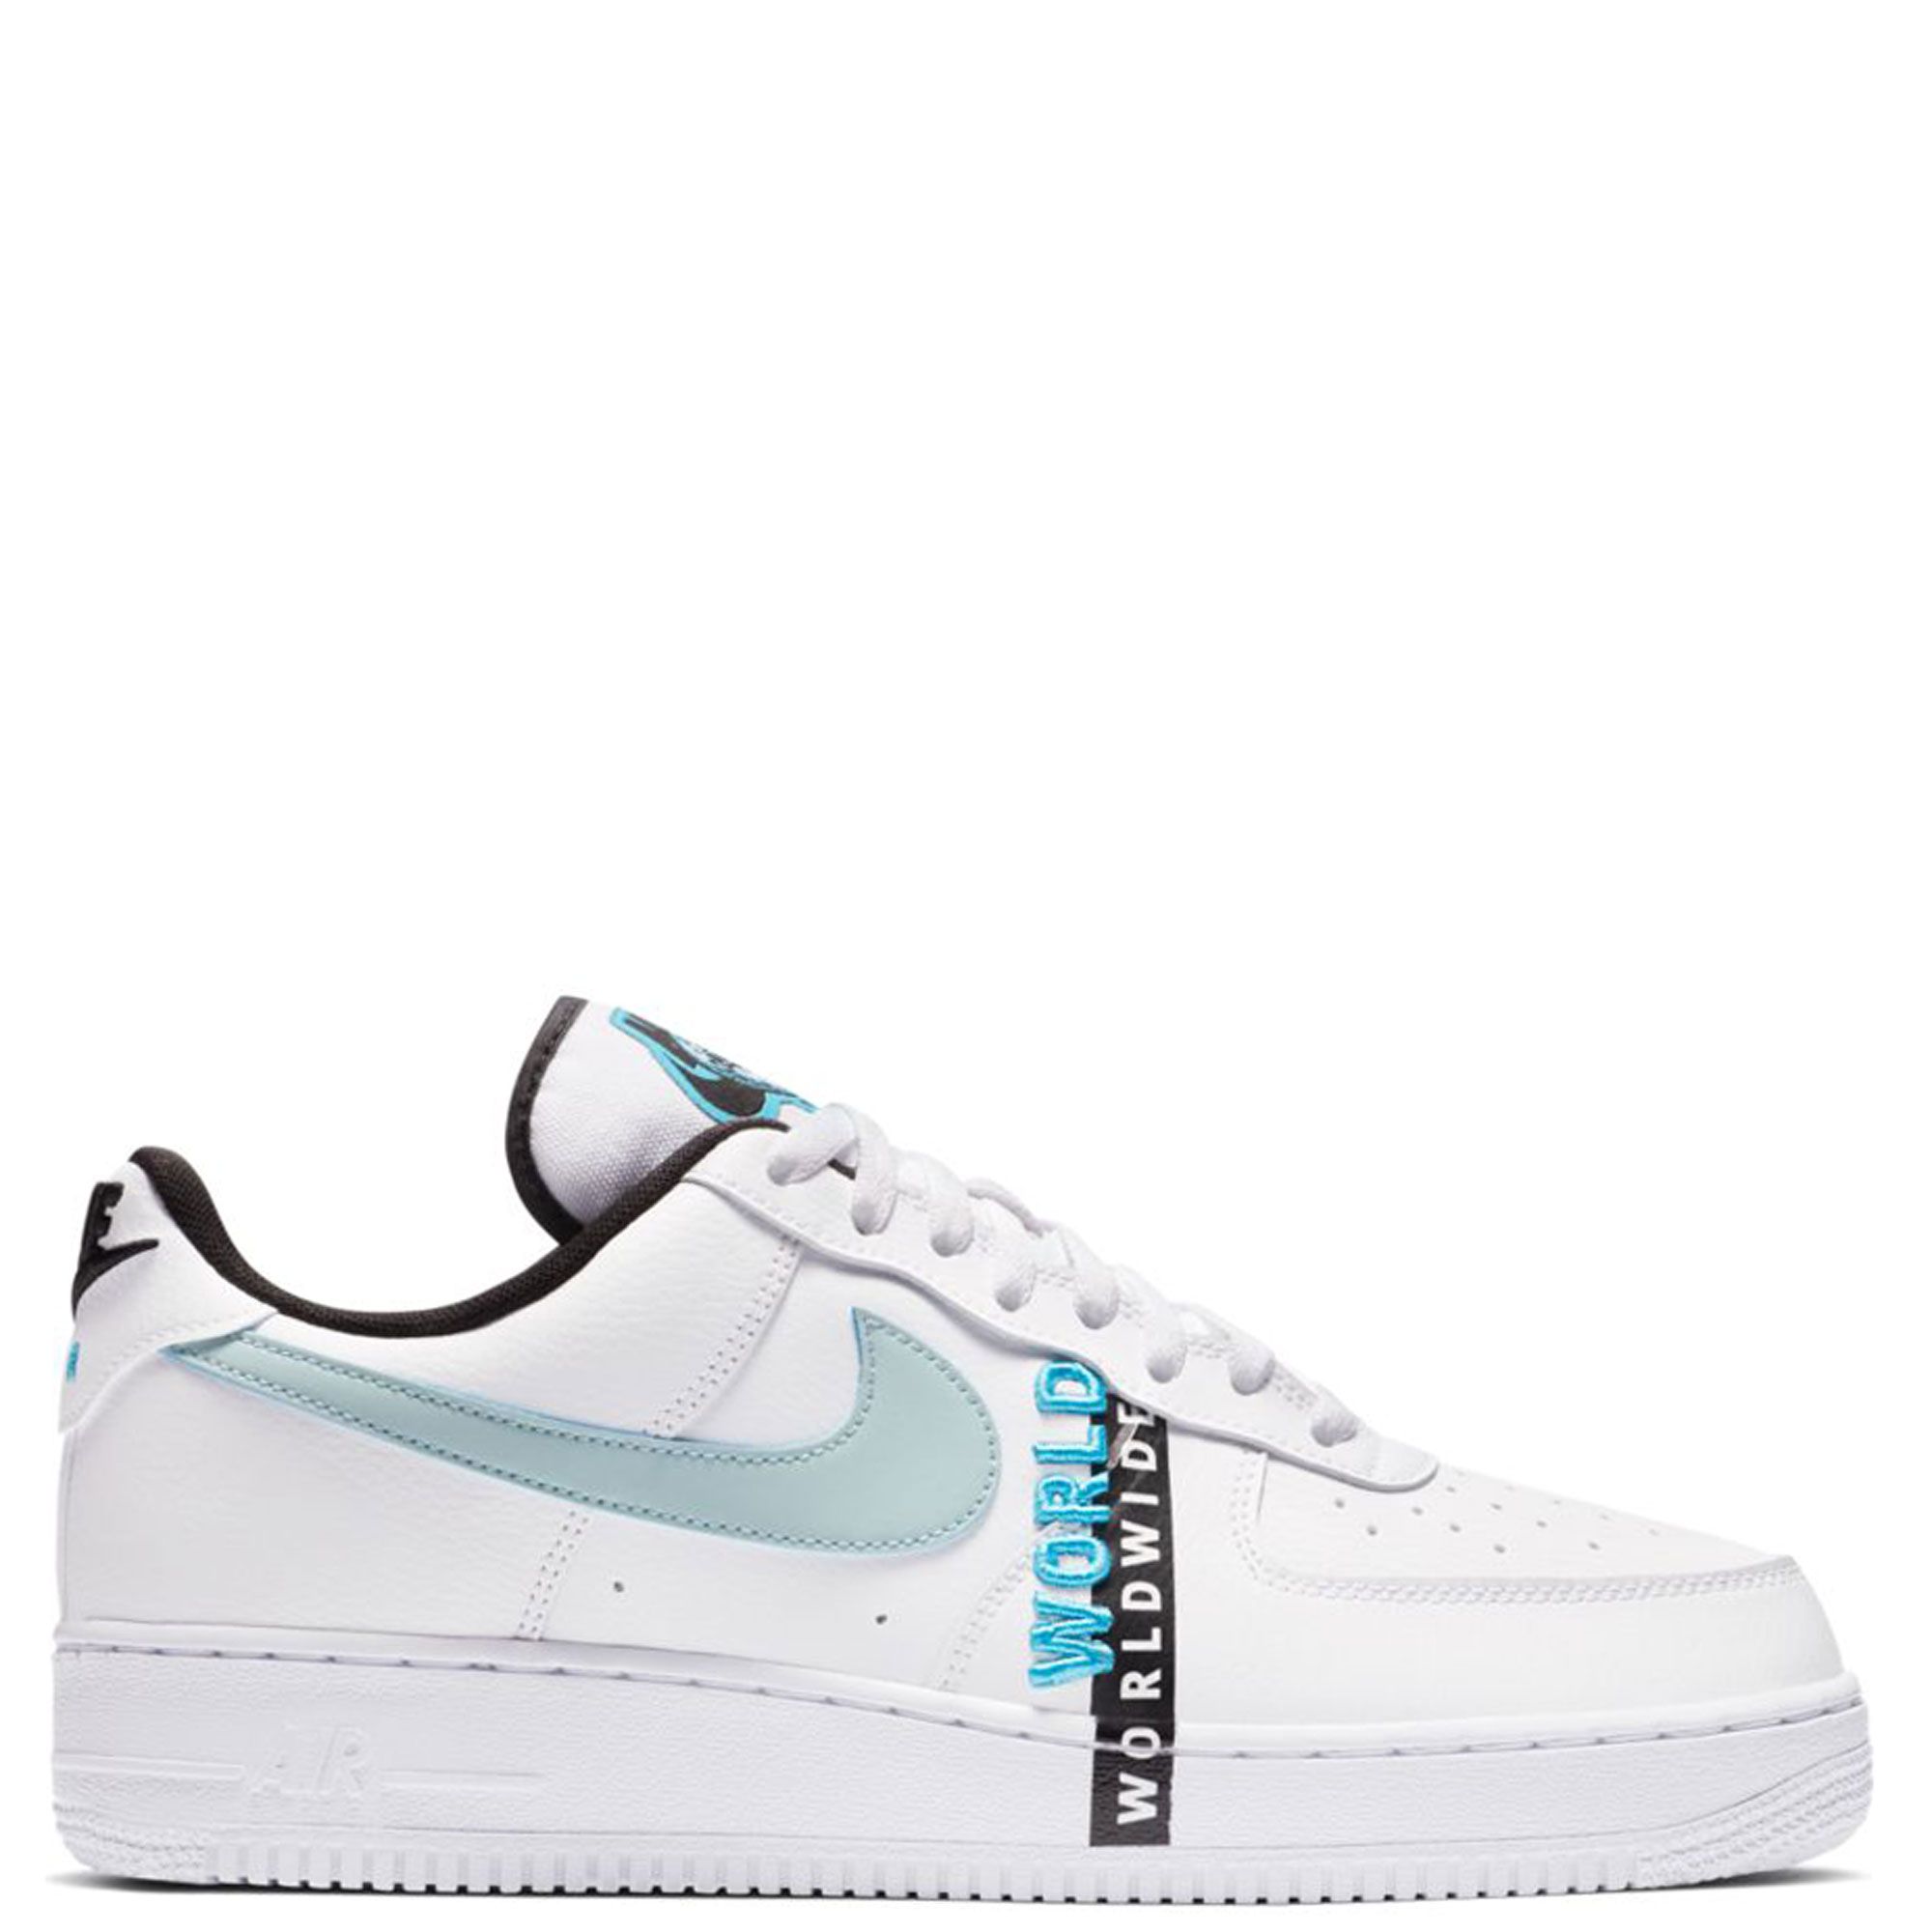 Nike Air Force 1 Low '07 LV8 Worldwide Pack White Blue Fury White